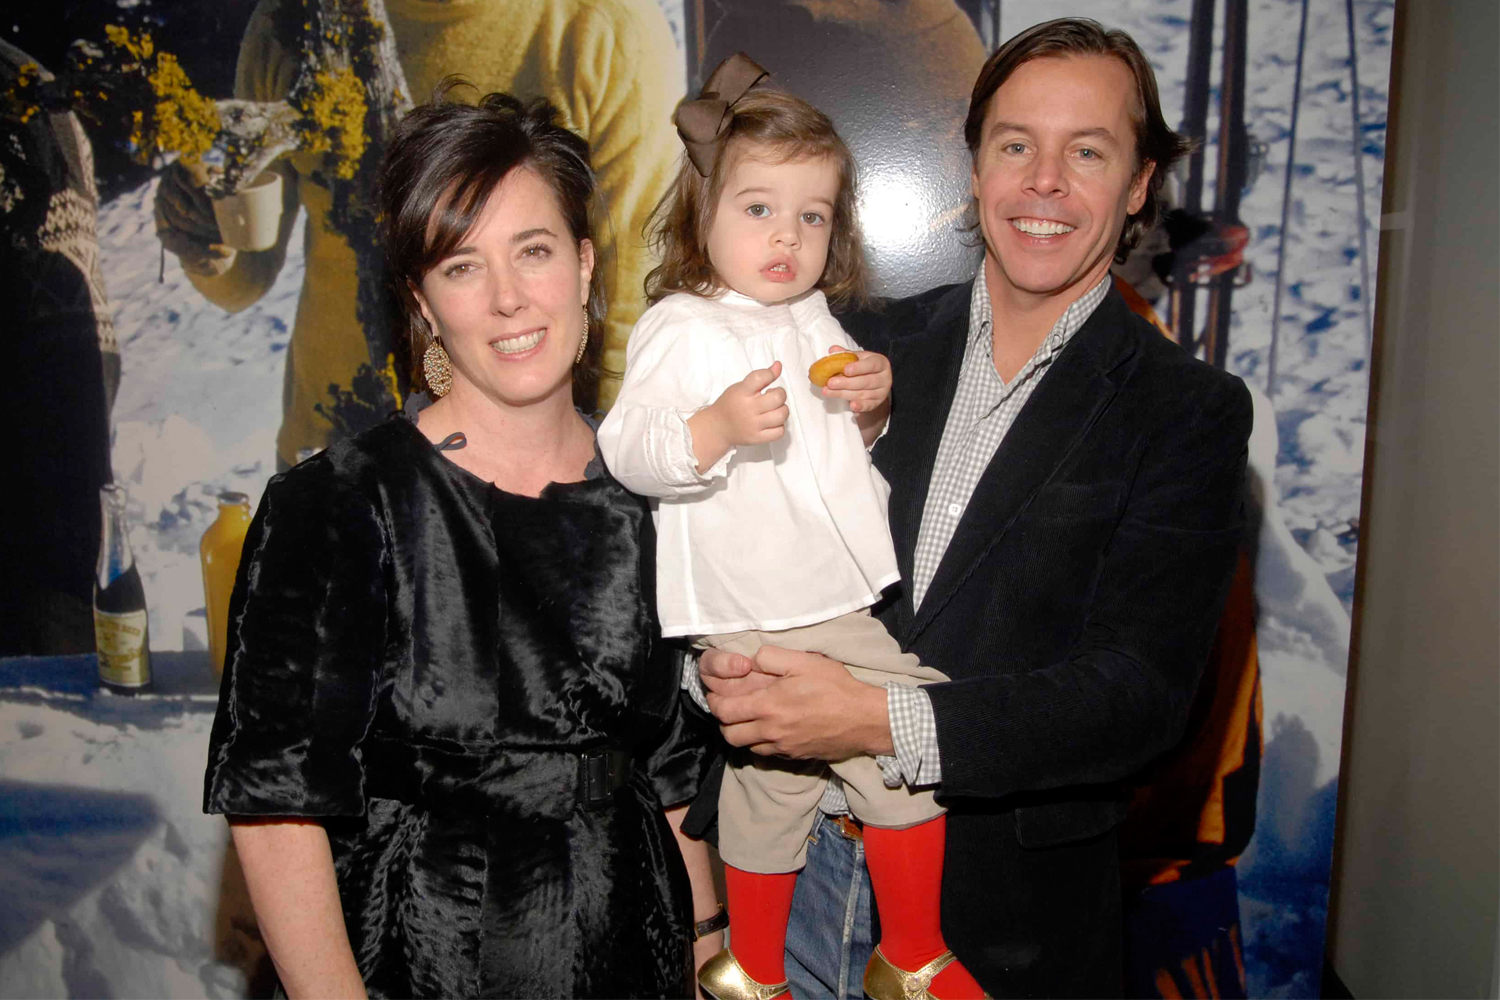 Andy Spade Returns to Instagram With Heartfelt Post About Late Wife